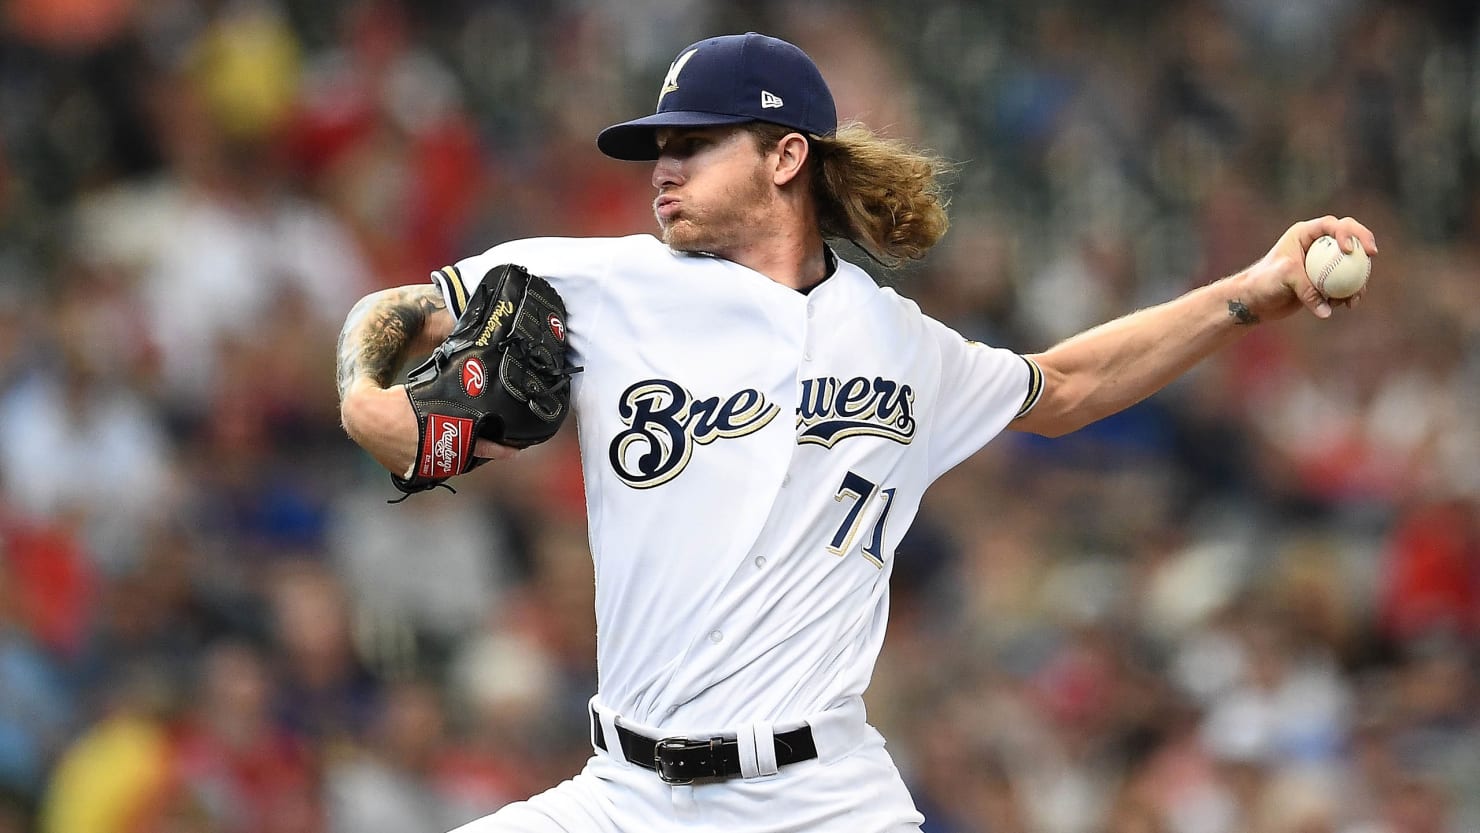 Brewers All-Star Josh Hader Was Exposed as a Teen Racist. What